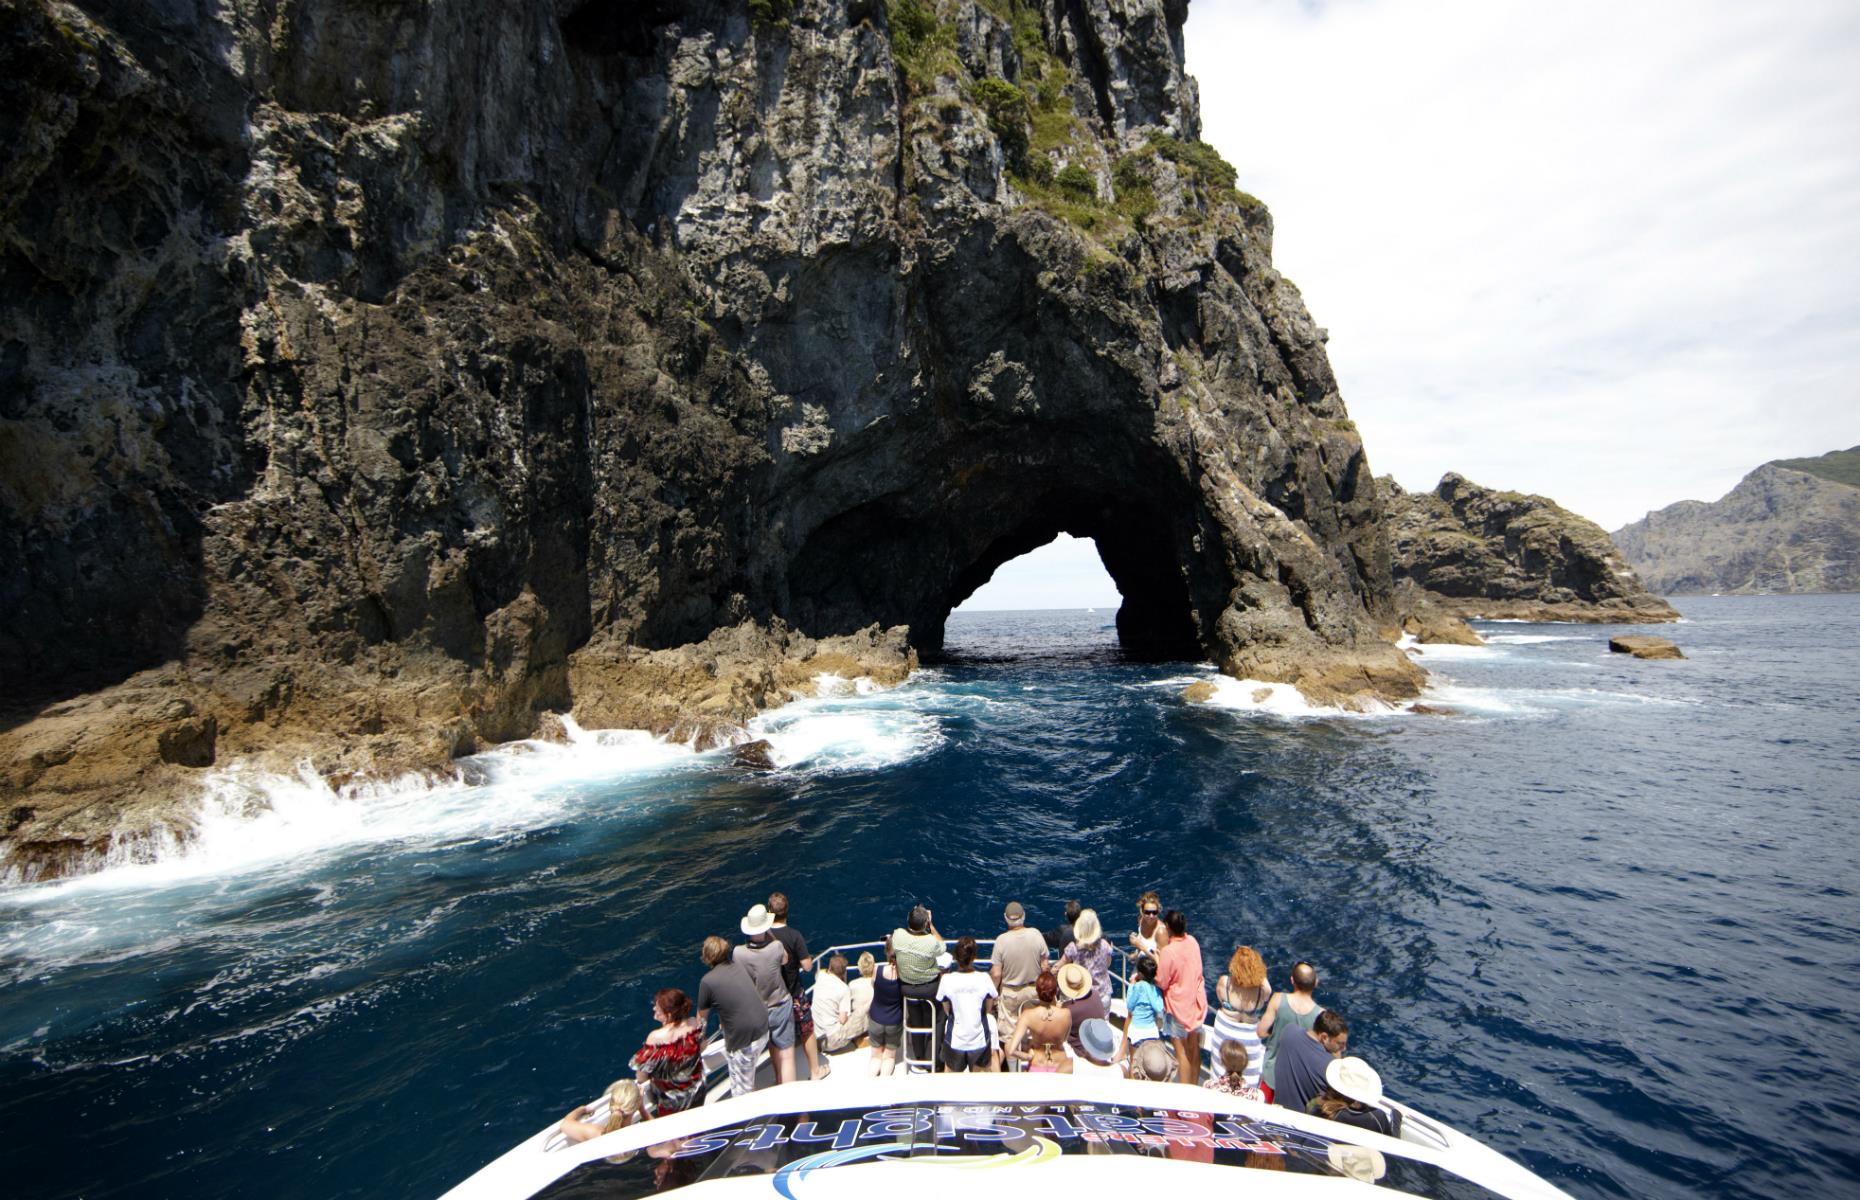 <p>The Bay of Islands is a watery wonderland with more than 100 offshore subtropical islands to explore. The talisman of the region is the Hole in the Rock (Piercy Island) – a spectacular rock formation that is possible to cruise right through on a calm day. Half-day tours leave from Paihia.</p>